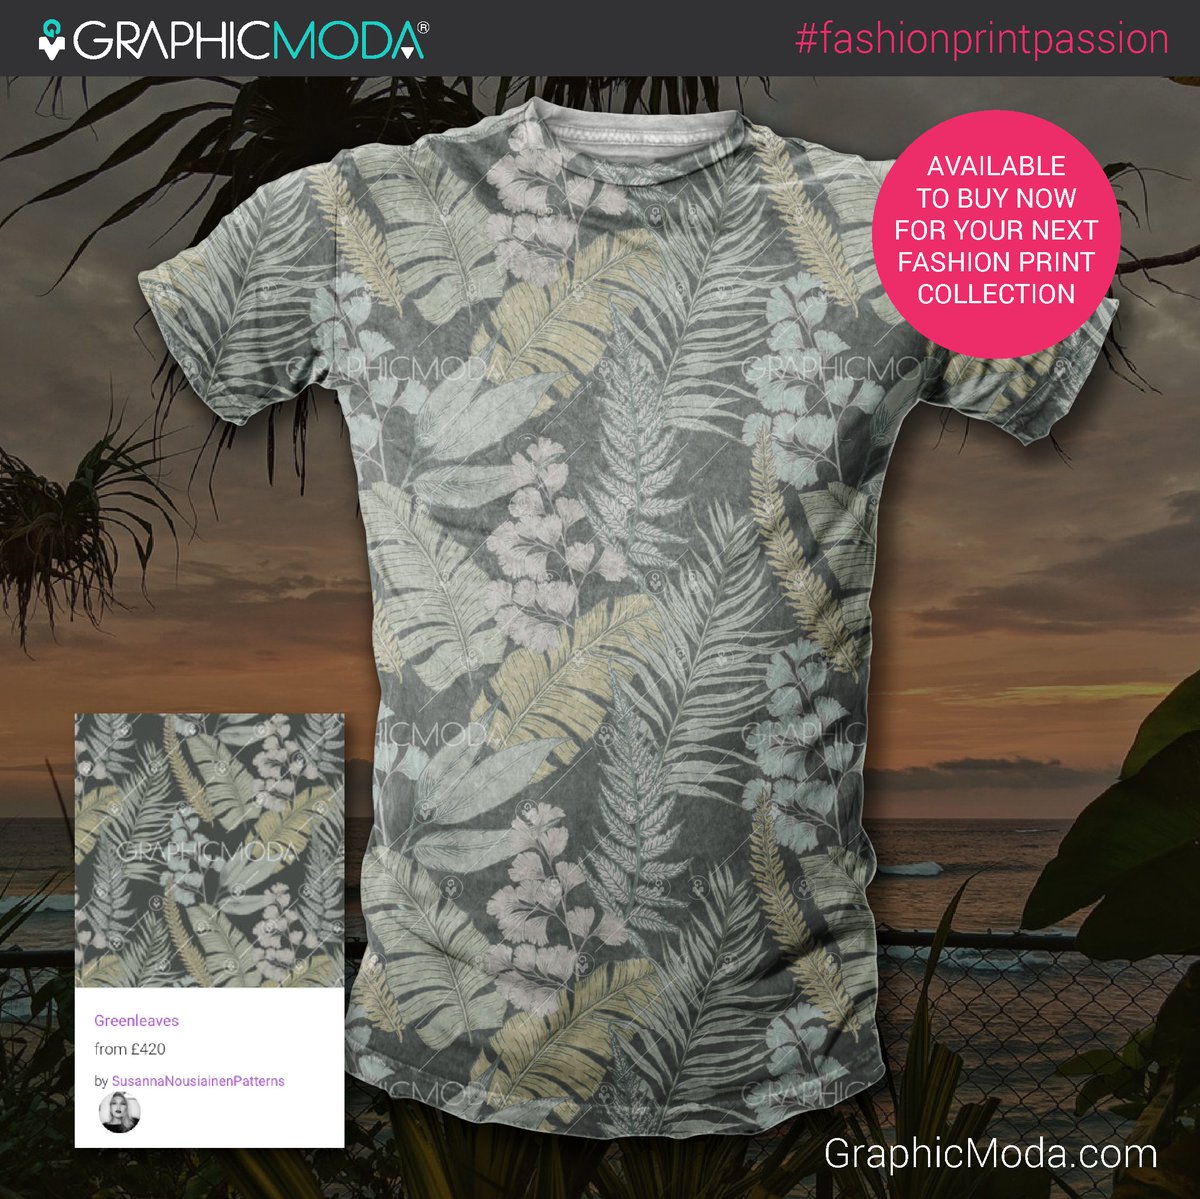 Muted tones... late night vibes... We are loving the latest uploads from Susanna Nousiainen Patterns
#graphicmoda #buyatgraphicmoda #fashionprintpassion #fashionprint #tropicalprint #menswear #menstshirts #mensclothing #surfacepattern #graphictee  #tropical #tropicalpattern